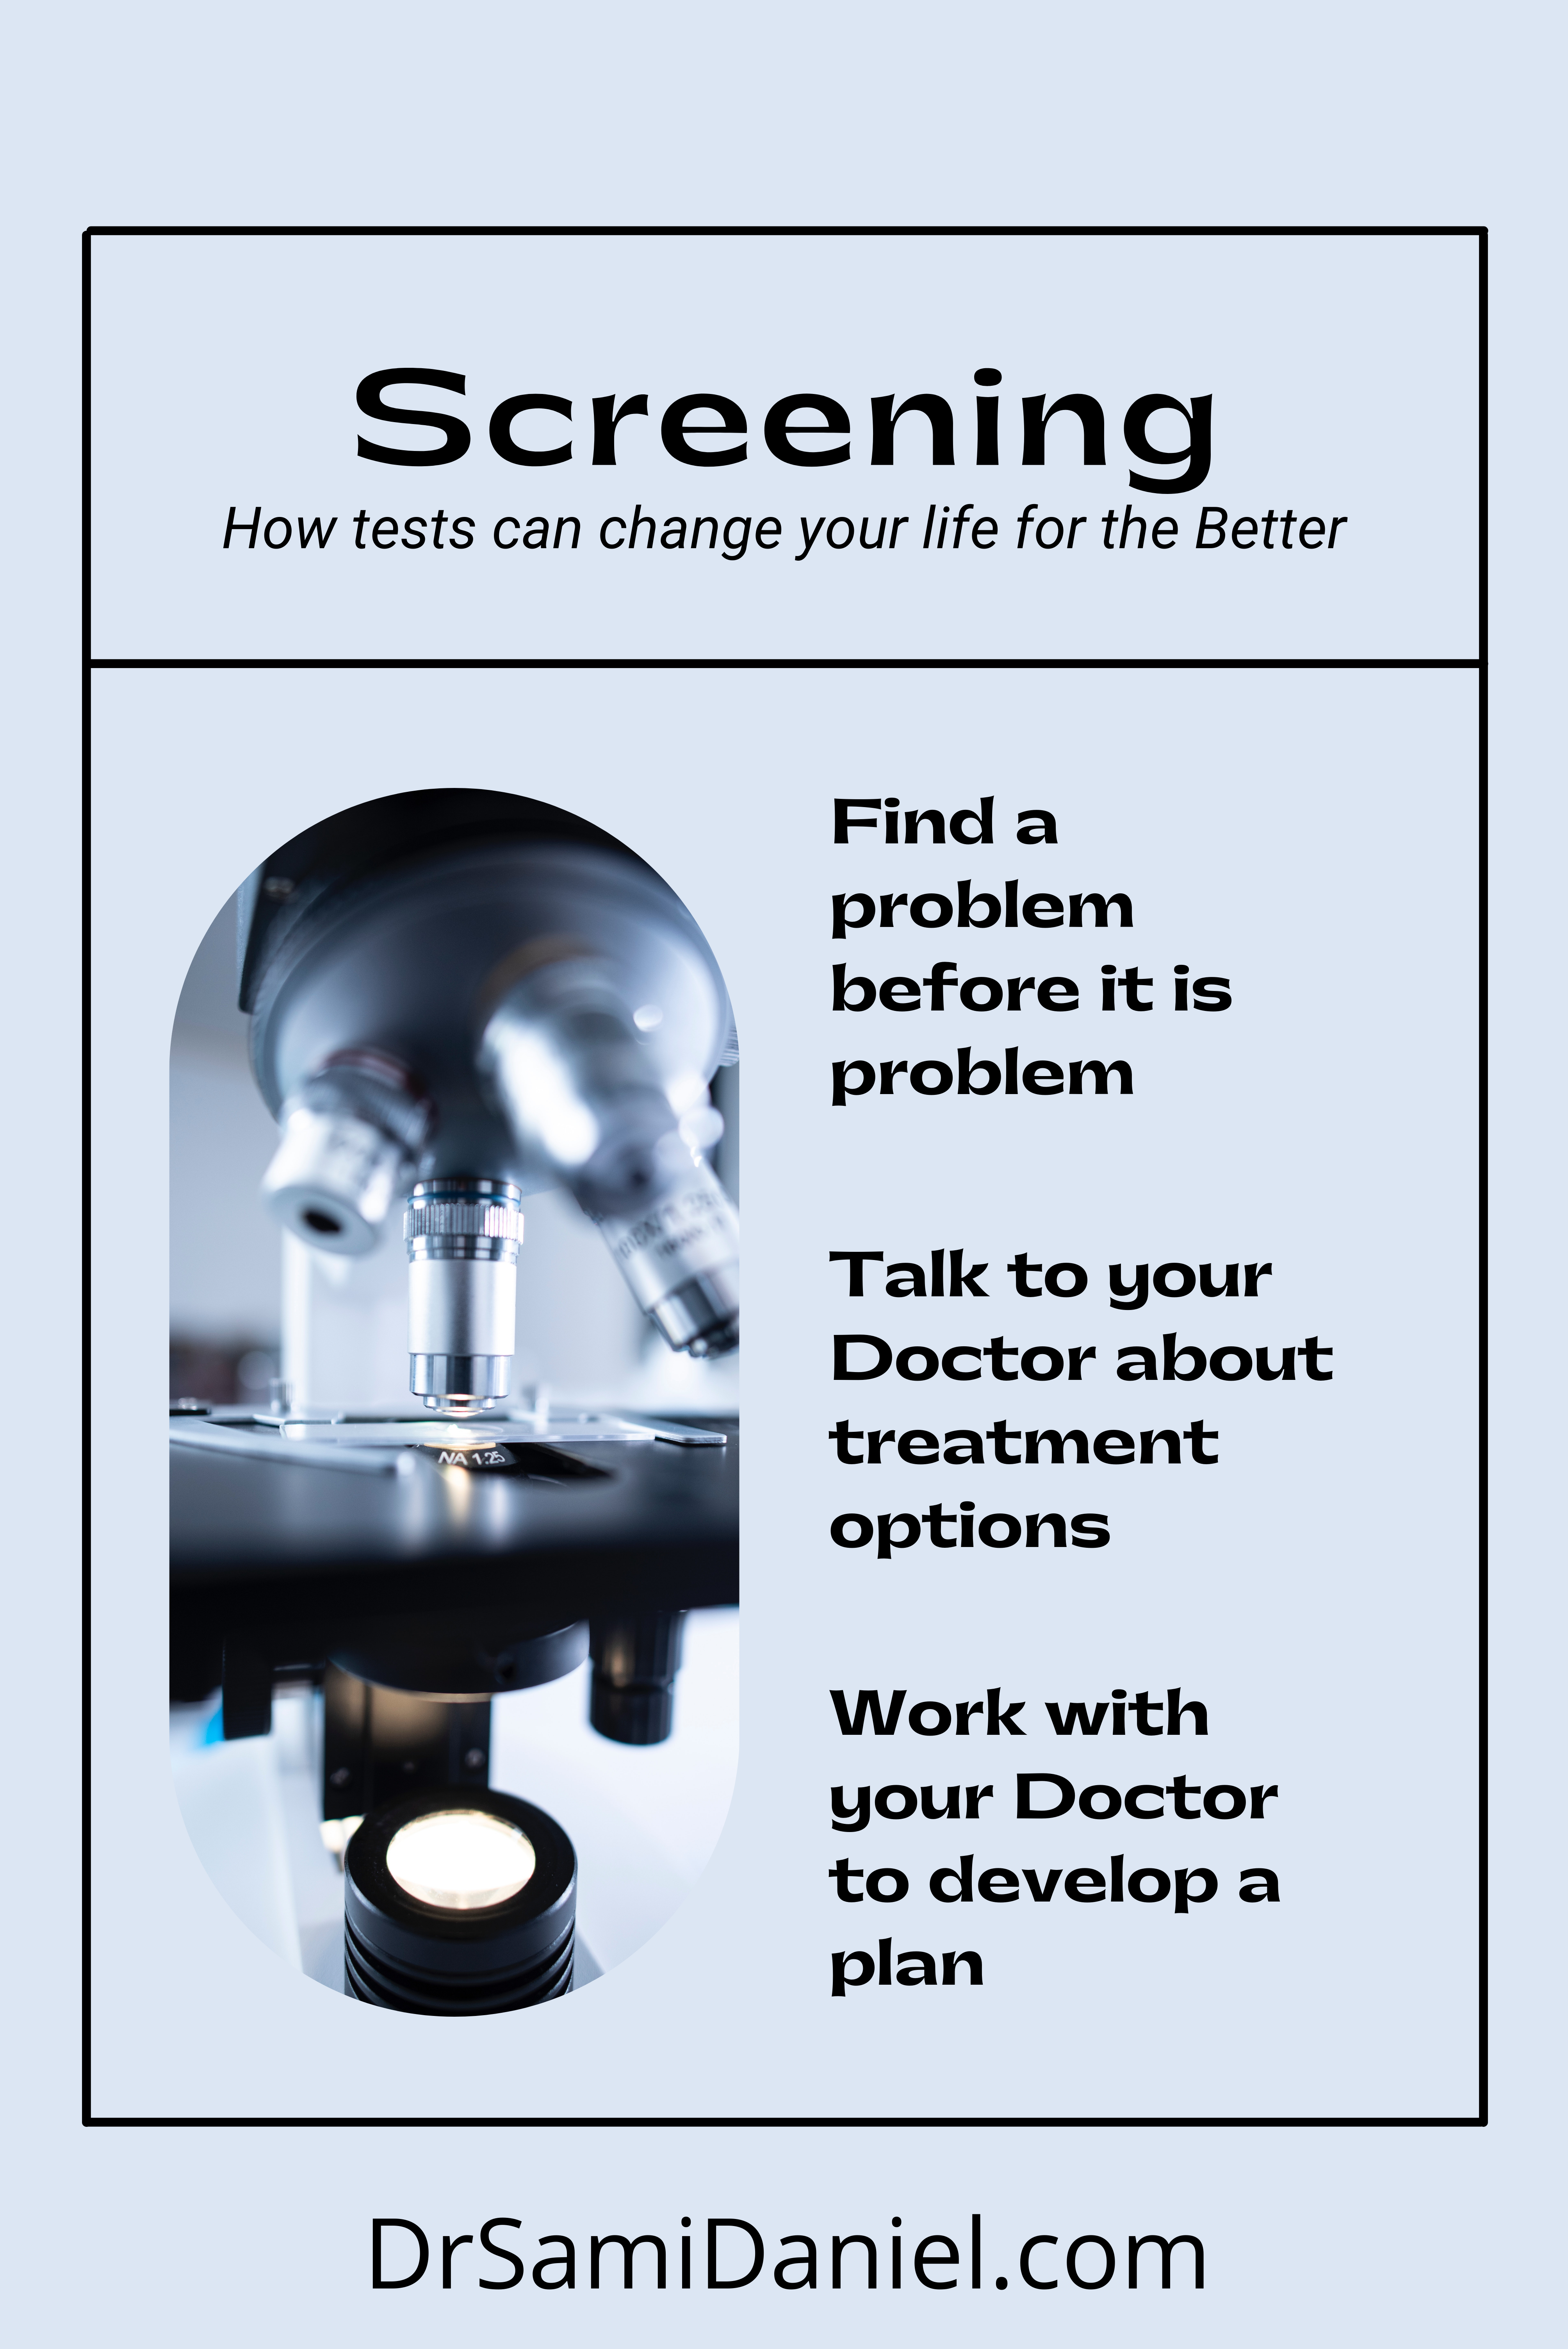 Learn how screening tests can change your life for the better